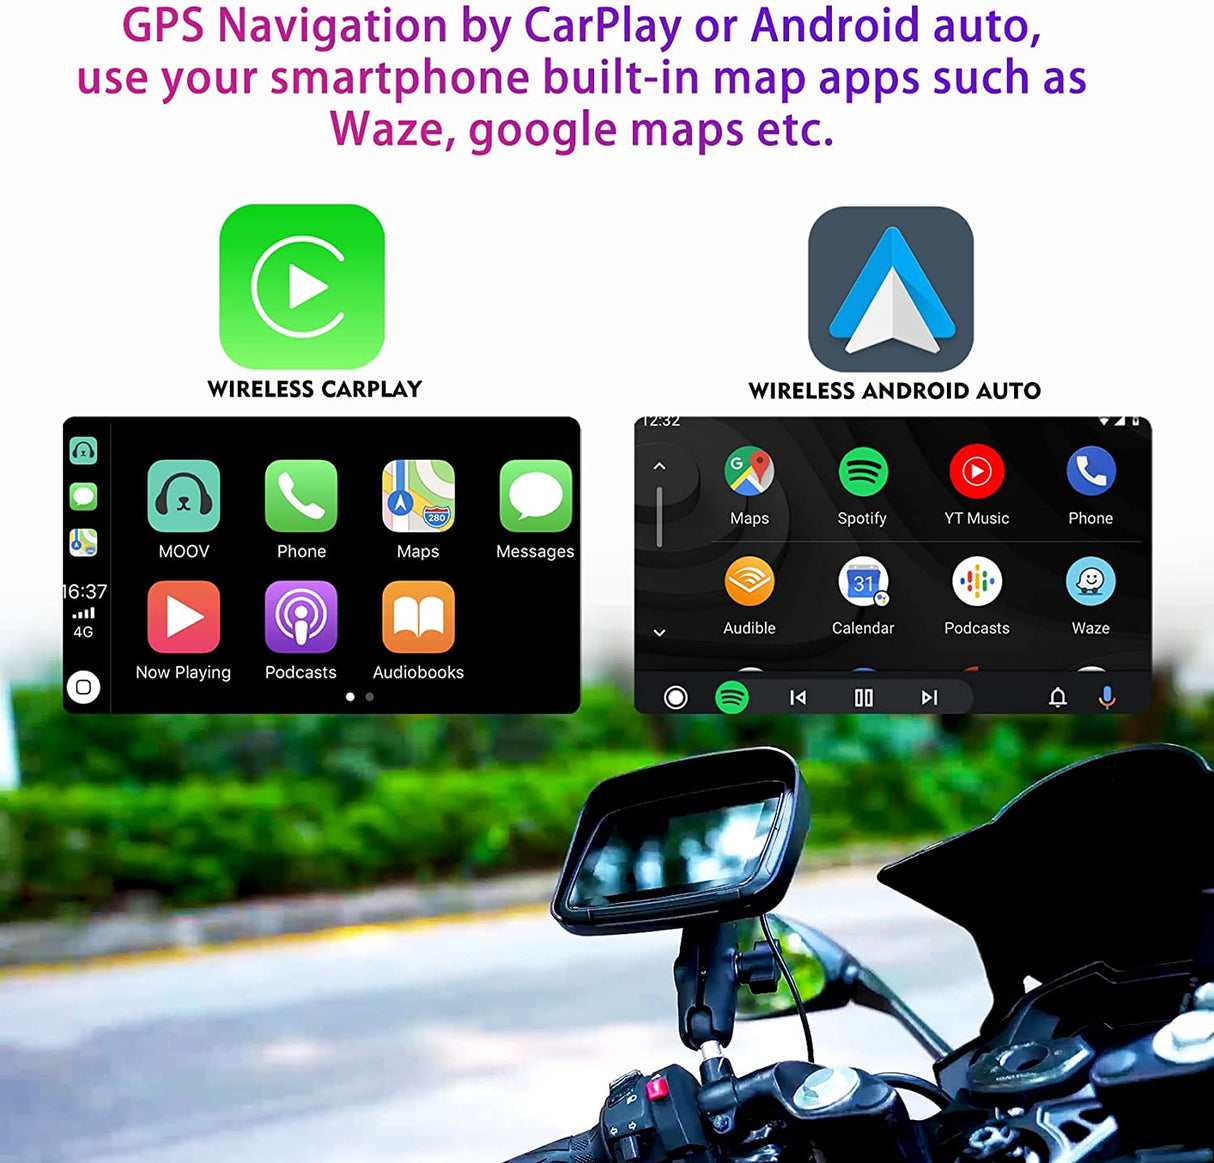  Wireless Apple Carplay Motorcycle Android Auto, 5'' IPS Touch  Screen for Motorcycle GPS Navigator, IPX7 Waterproof, Dual Bluetooth,  Siri/Google Assistant, TF/USB Input, Portable Carplay Motorcycle :  Electronics